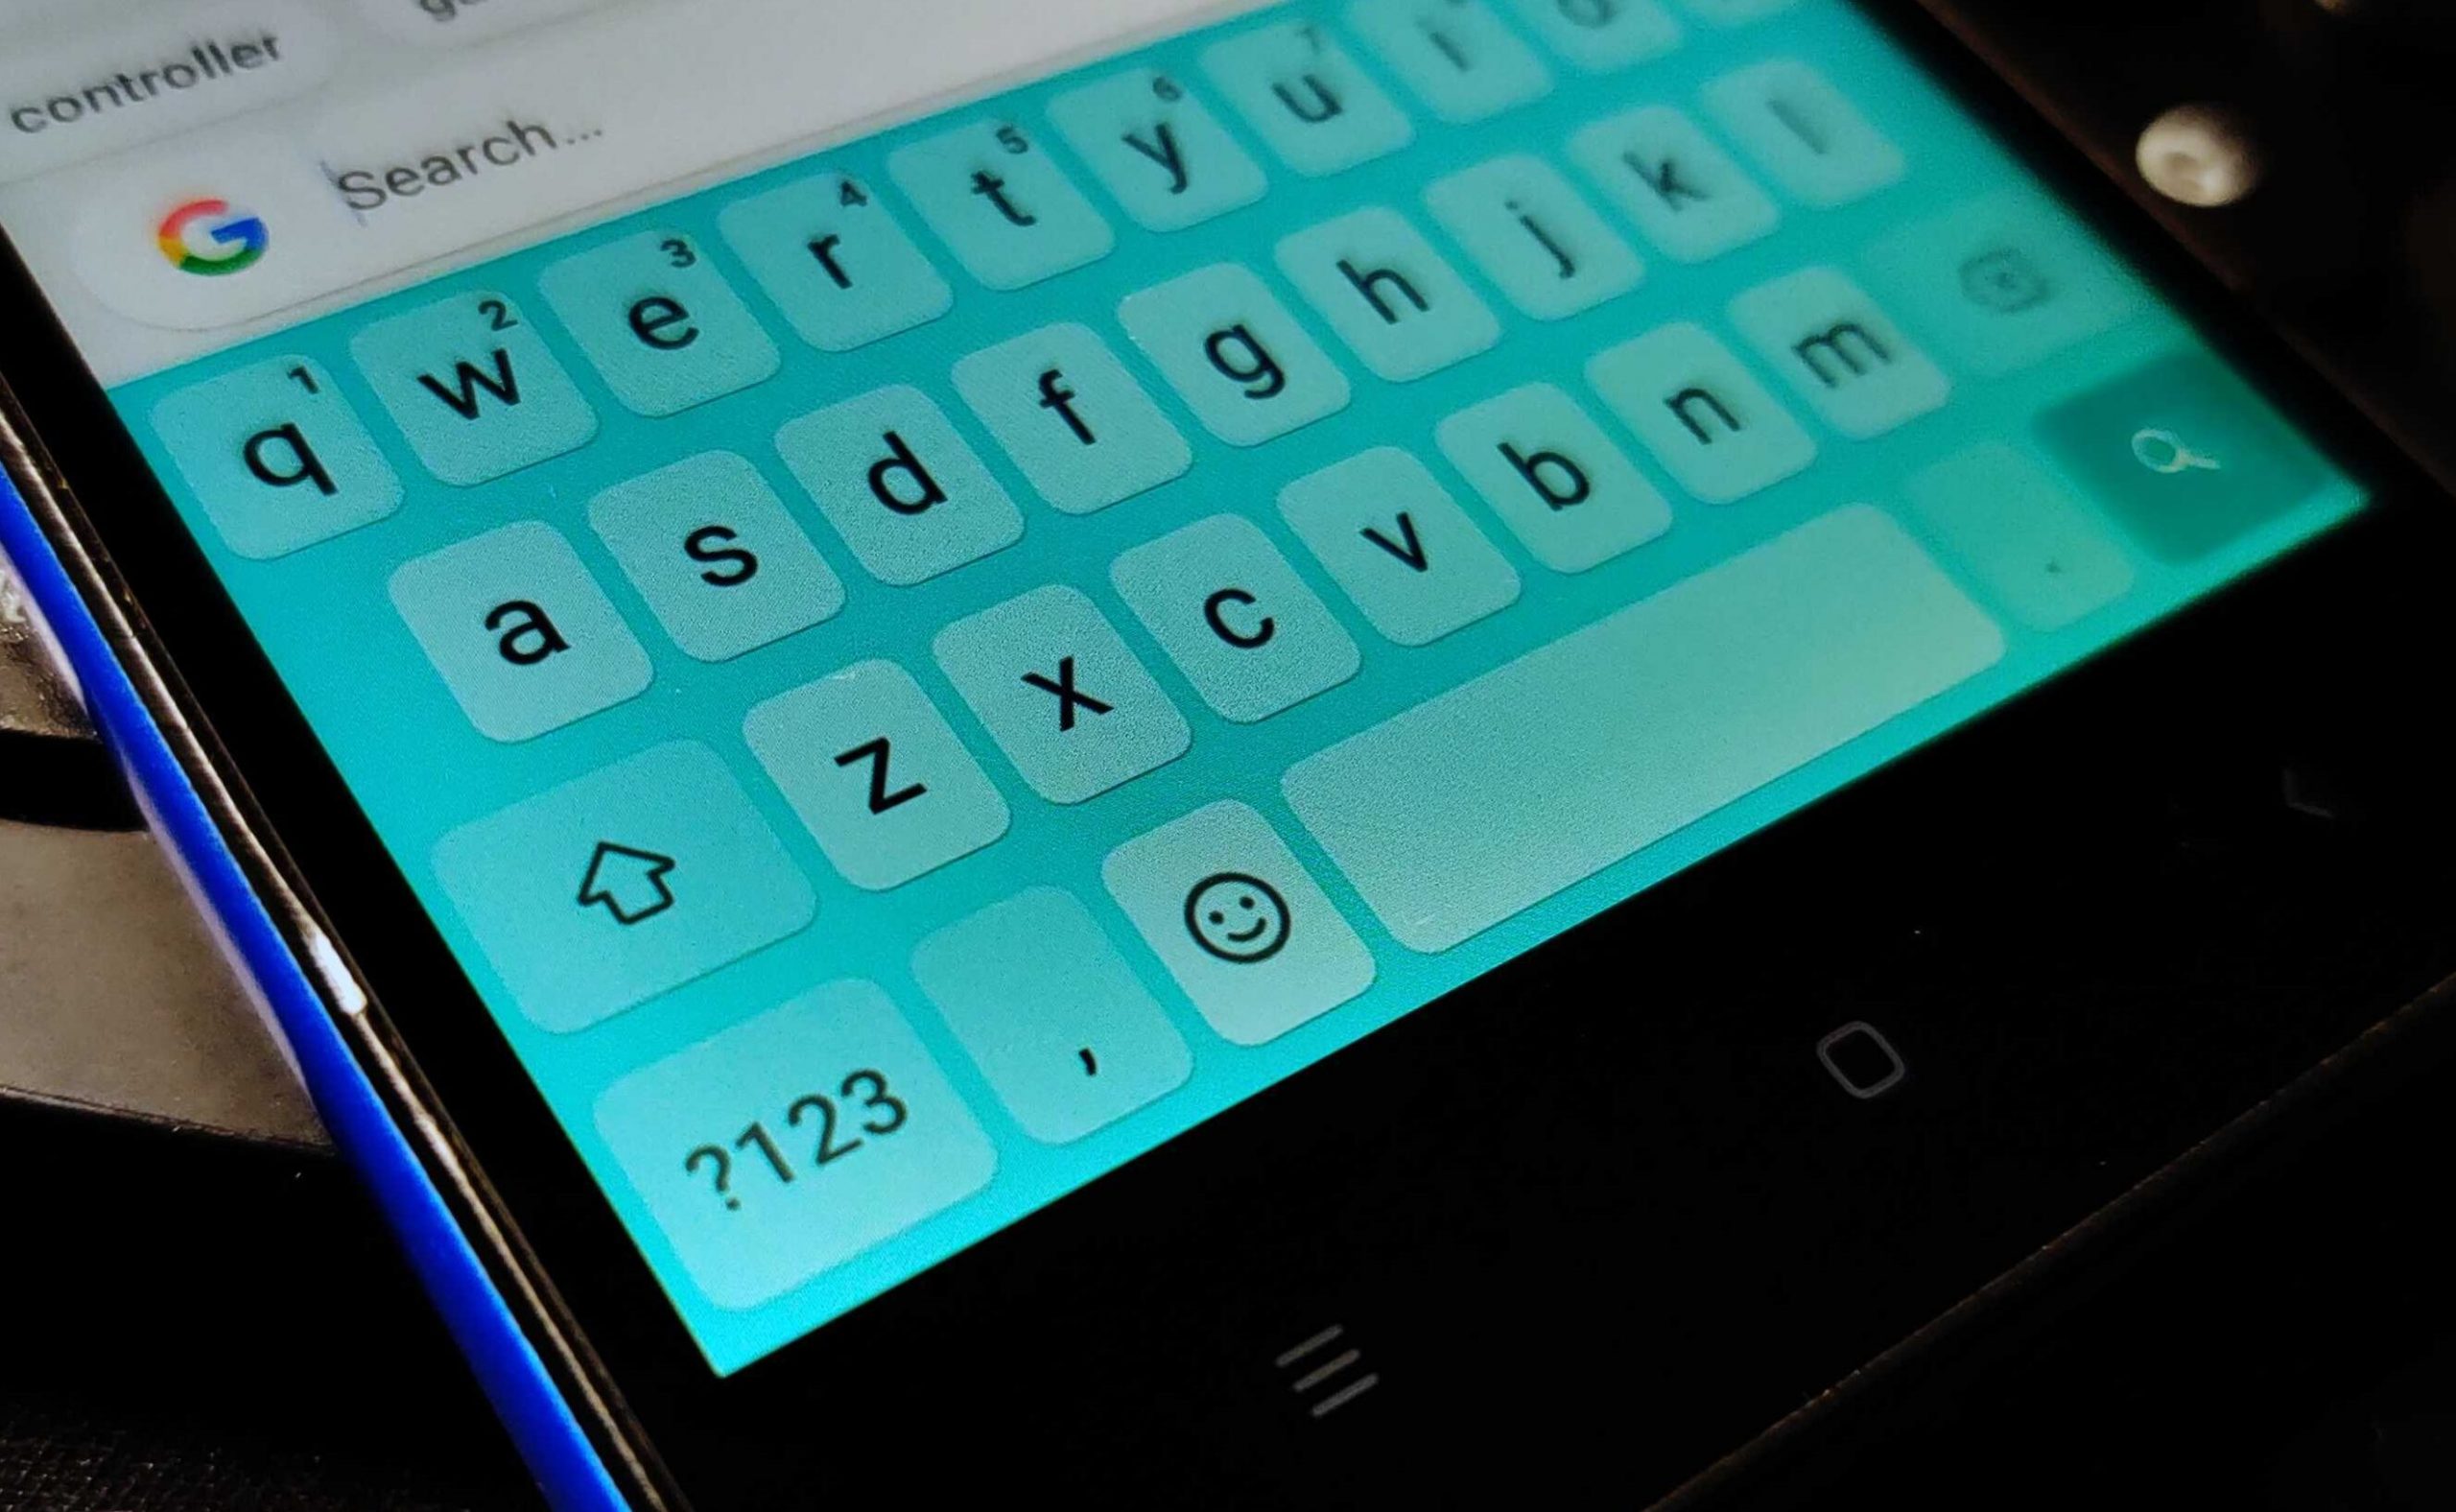 Poll of The Week: Which keyboard app do you use?